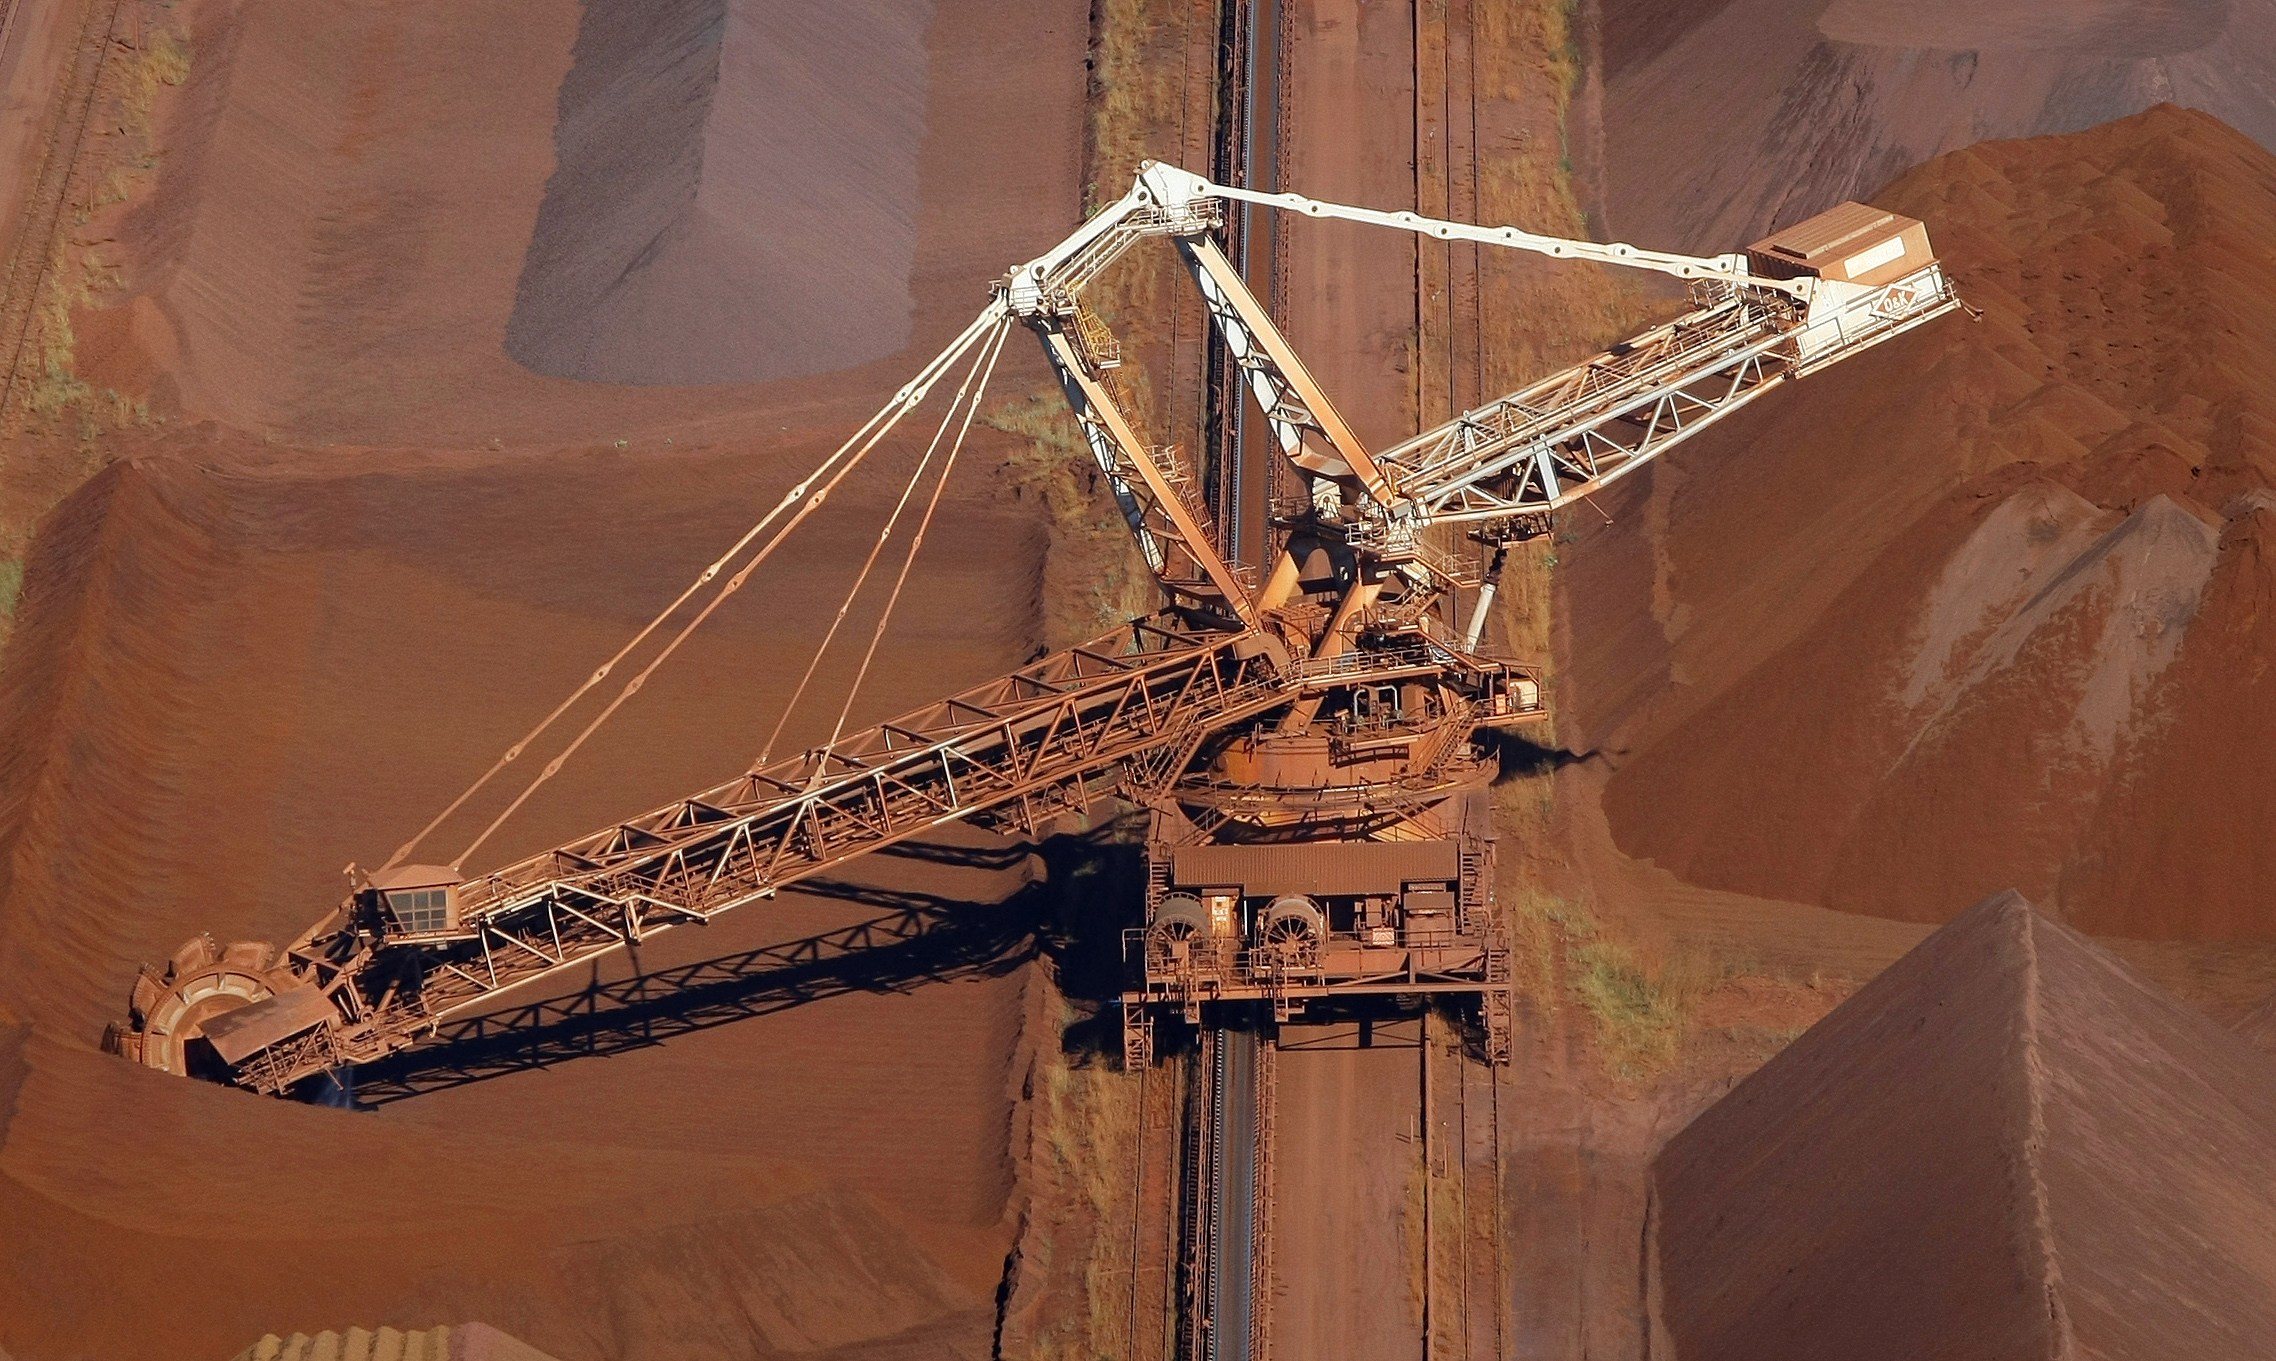 Port Hedland handles about a fifth of the global seaborne market for iron ore. Photo: Reuters